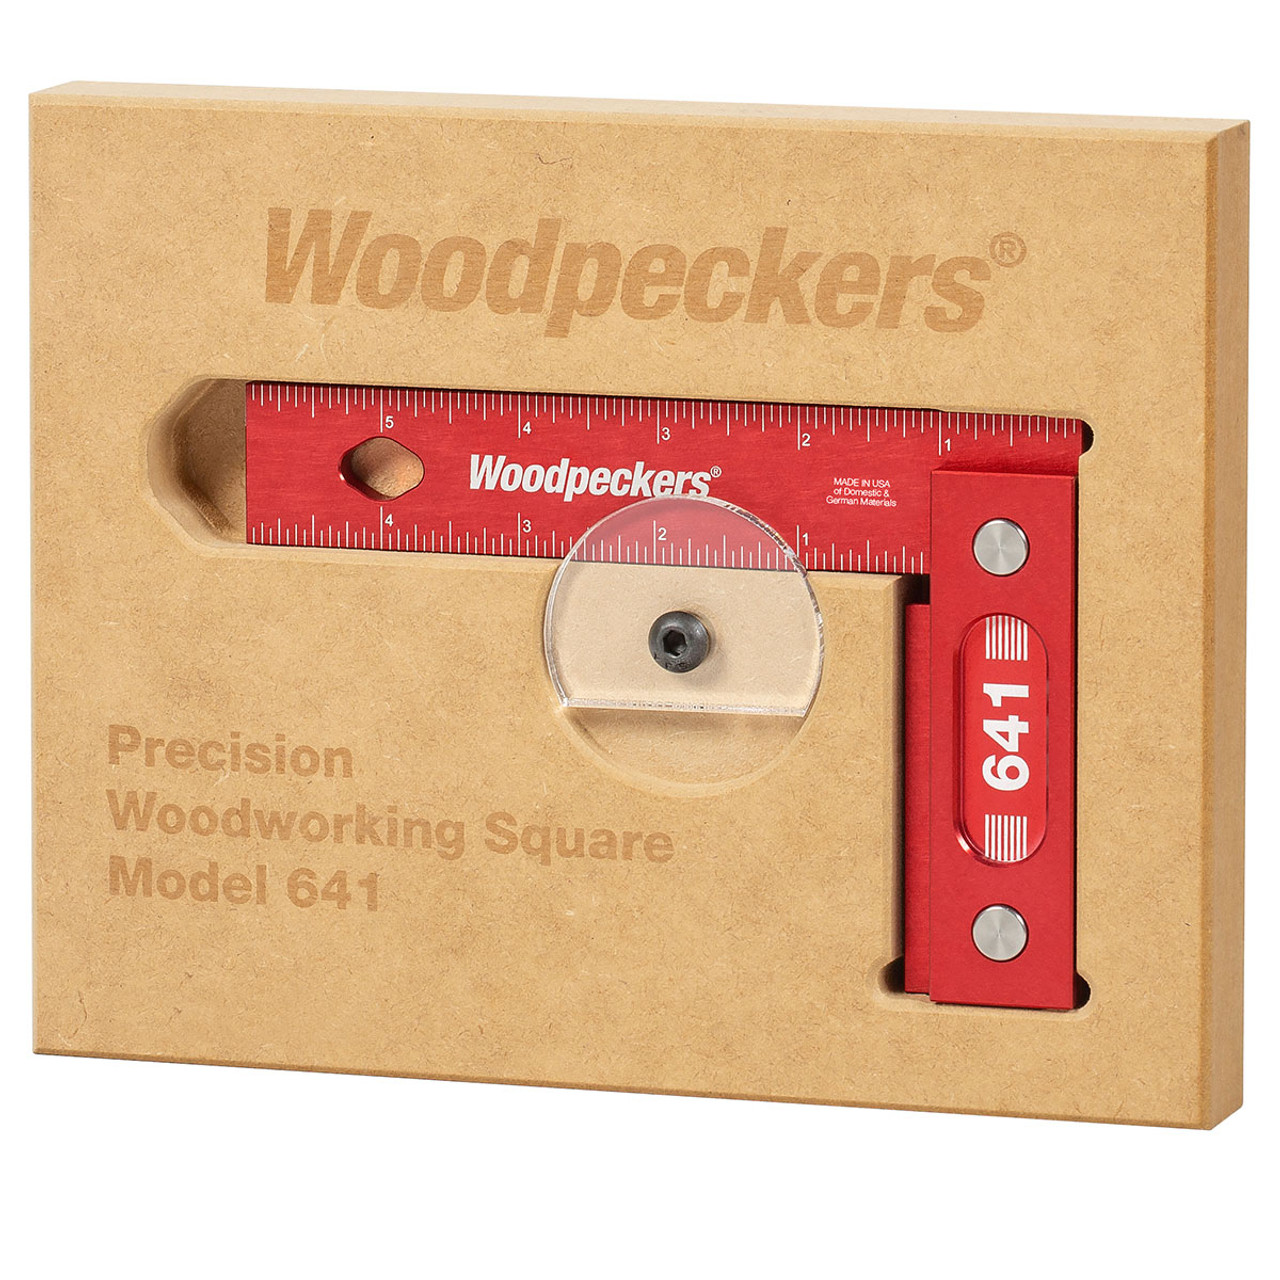 Woodpeckers | 1281 12 Precision Woodworking Square (1281R)